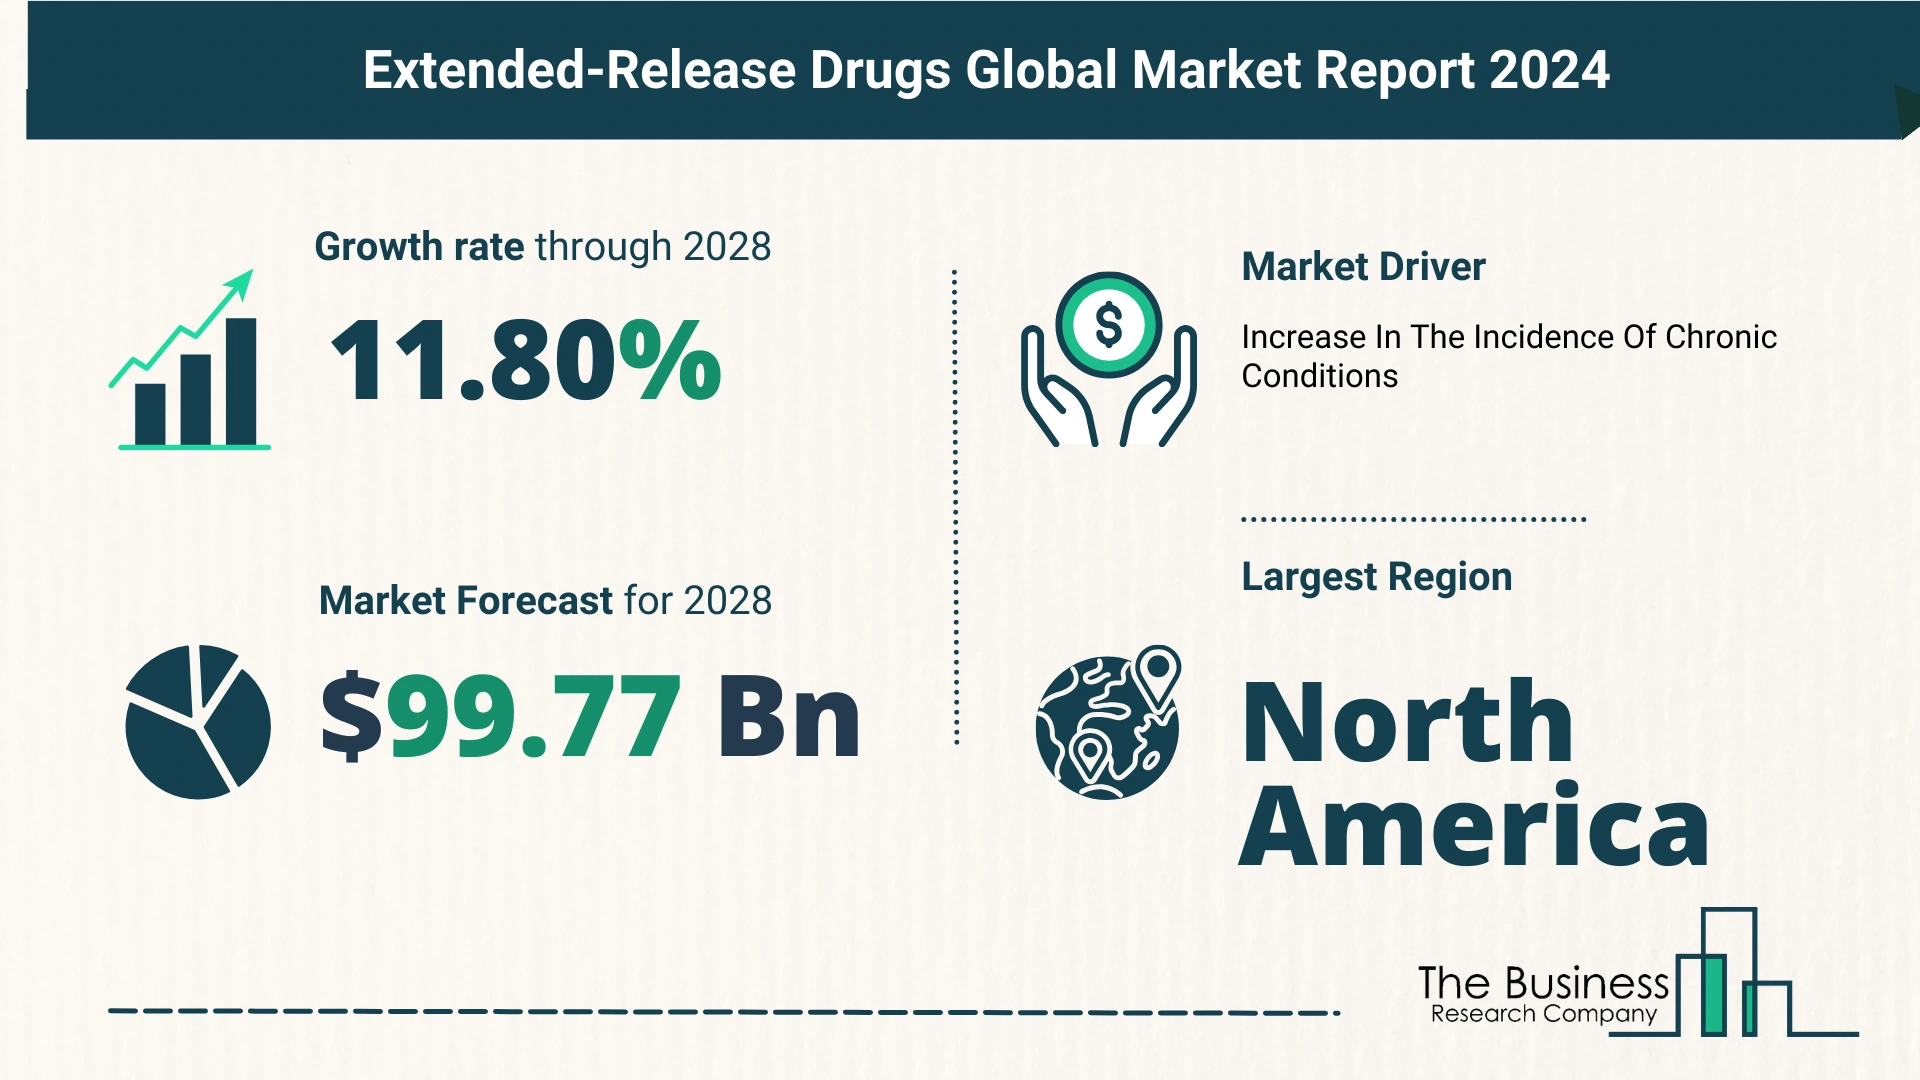 What Is The Forecast Growth Rate For The Extended-Release Drugs Market?